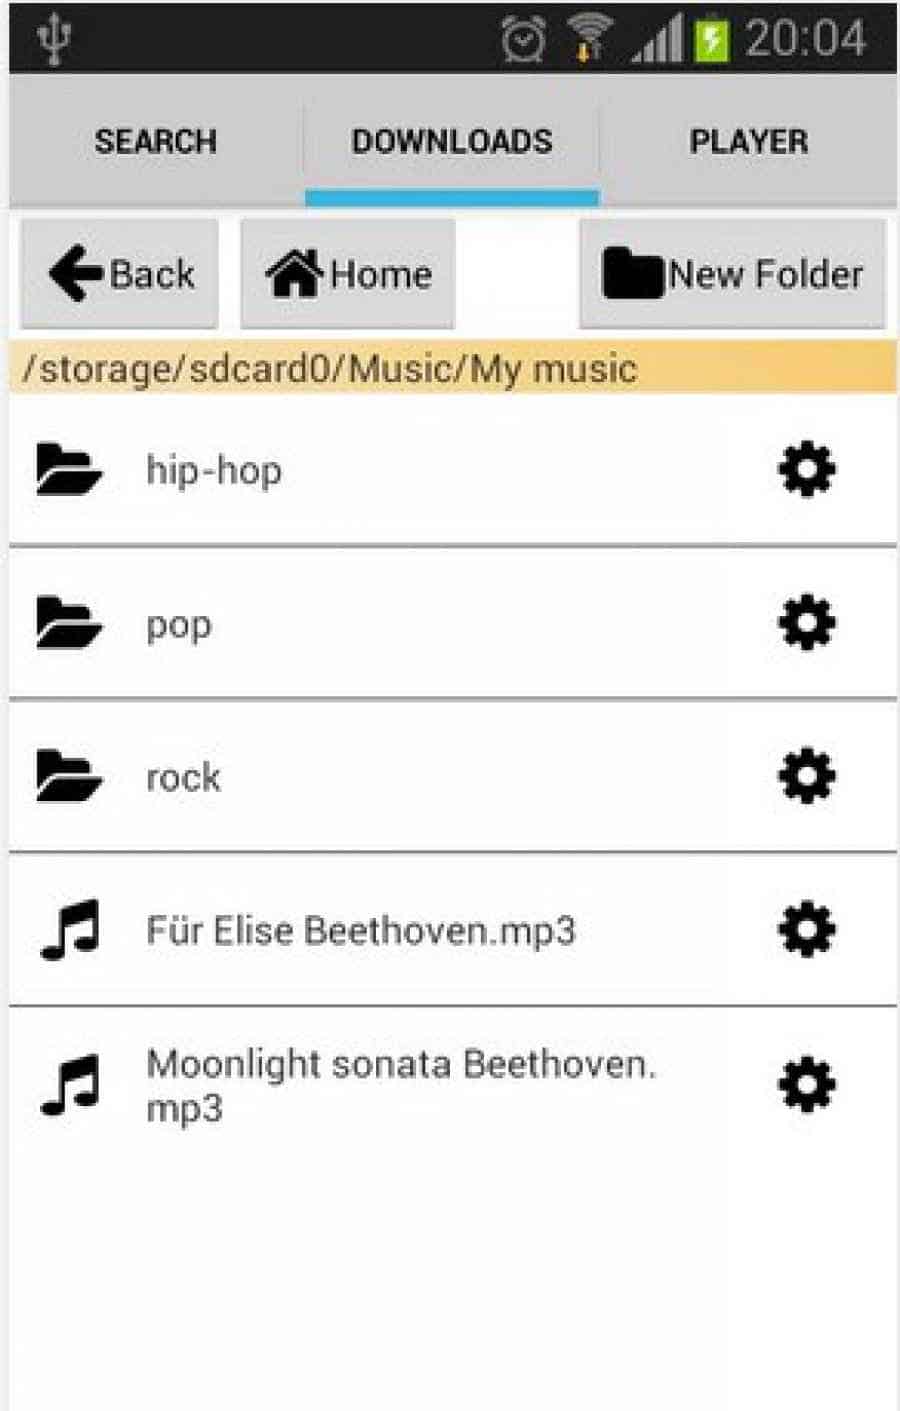 10 Best~Music~Downloader~apps for android 2018